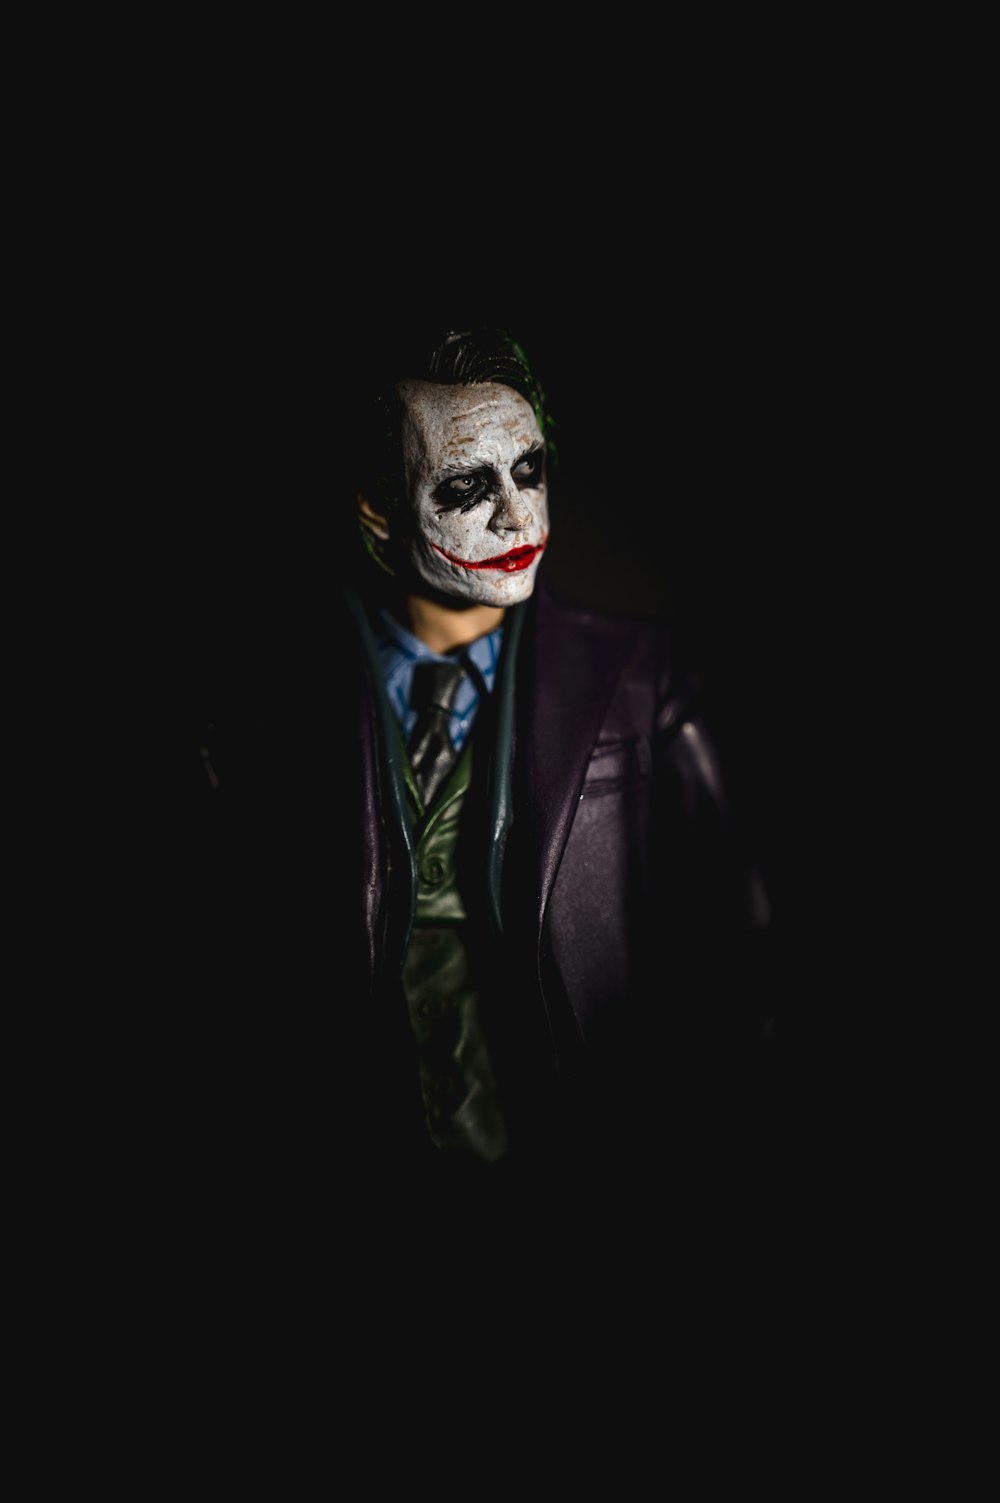 Download HD Images of Joker – Extensive Collection of Stunning Joker Images in Full 4K